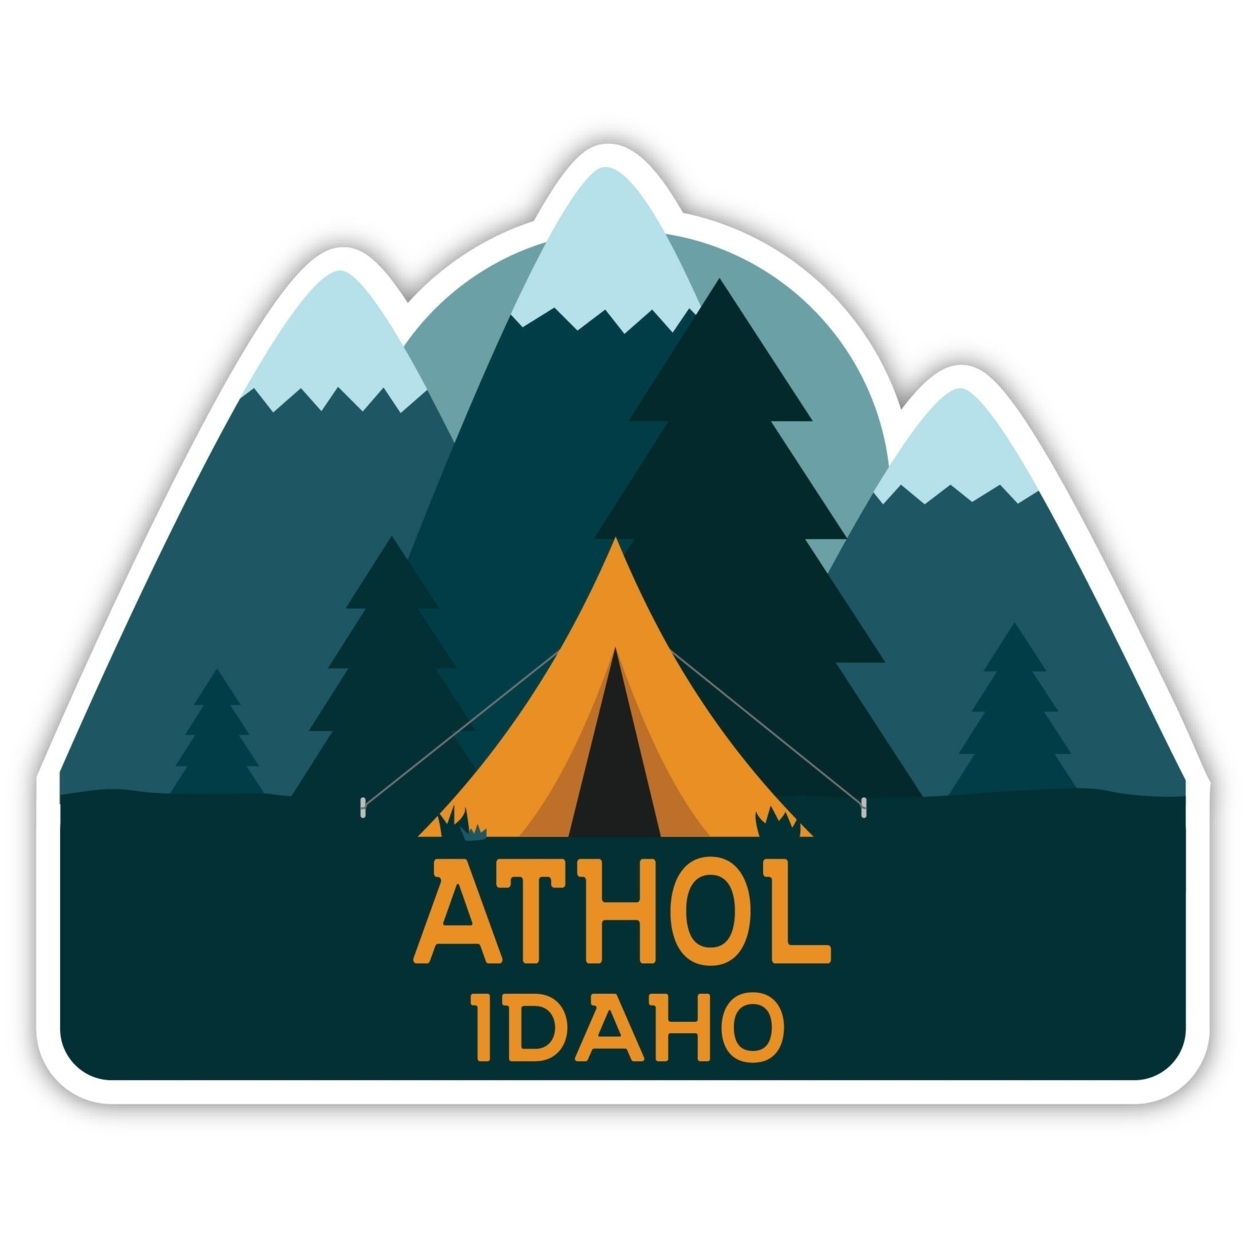 Athol Idaho Souvenir Decorative Stickers (Choose Theme And Size) - 4-Pack, 6-Inch, Tent